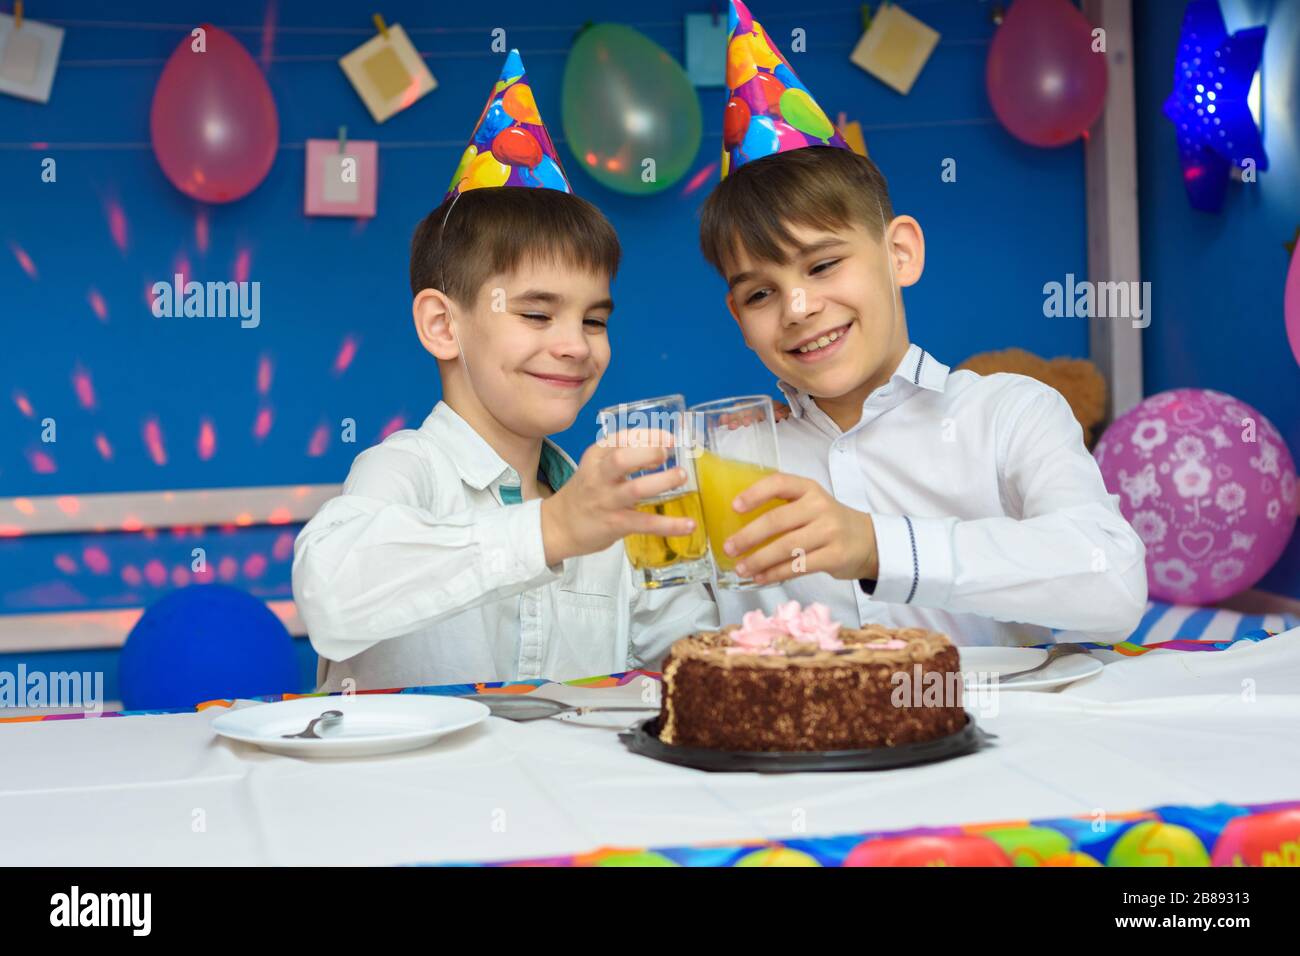 Two brothers banging glasses of juice at a birthday party Stock Photo